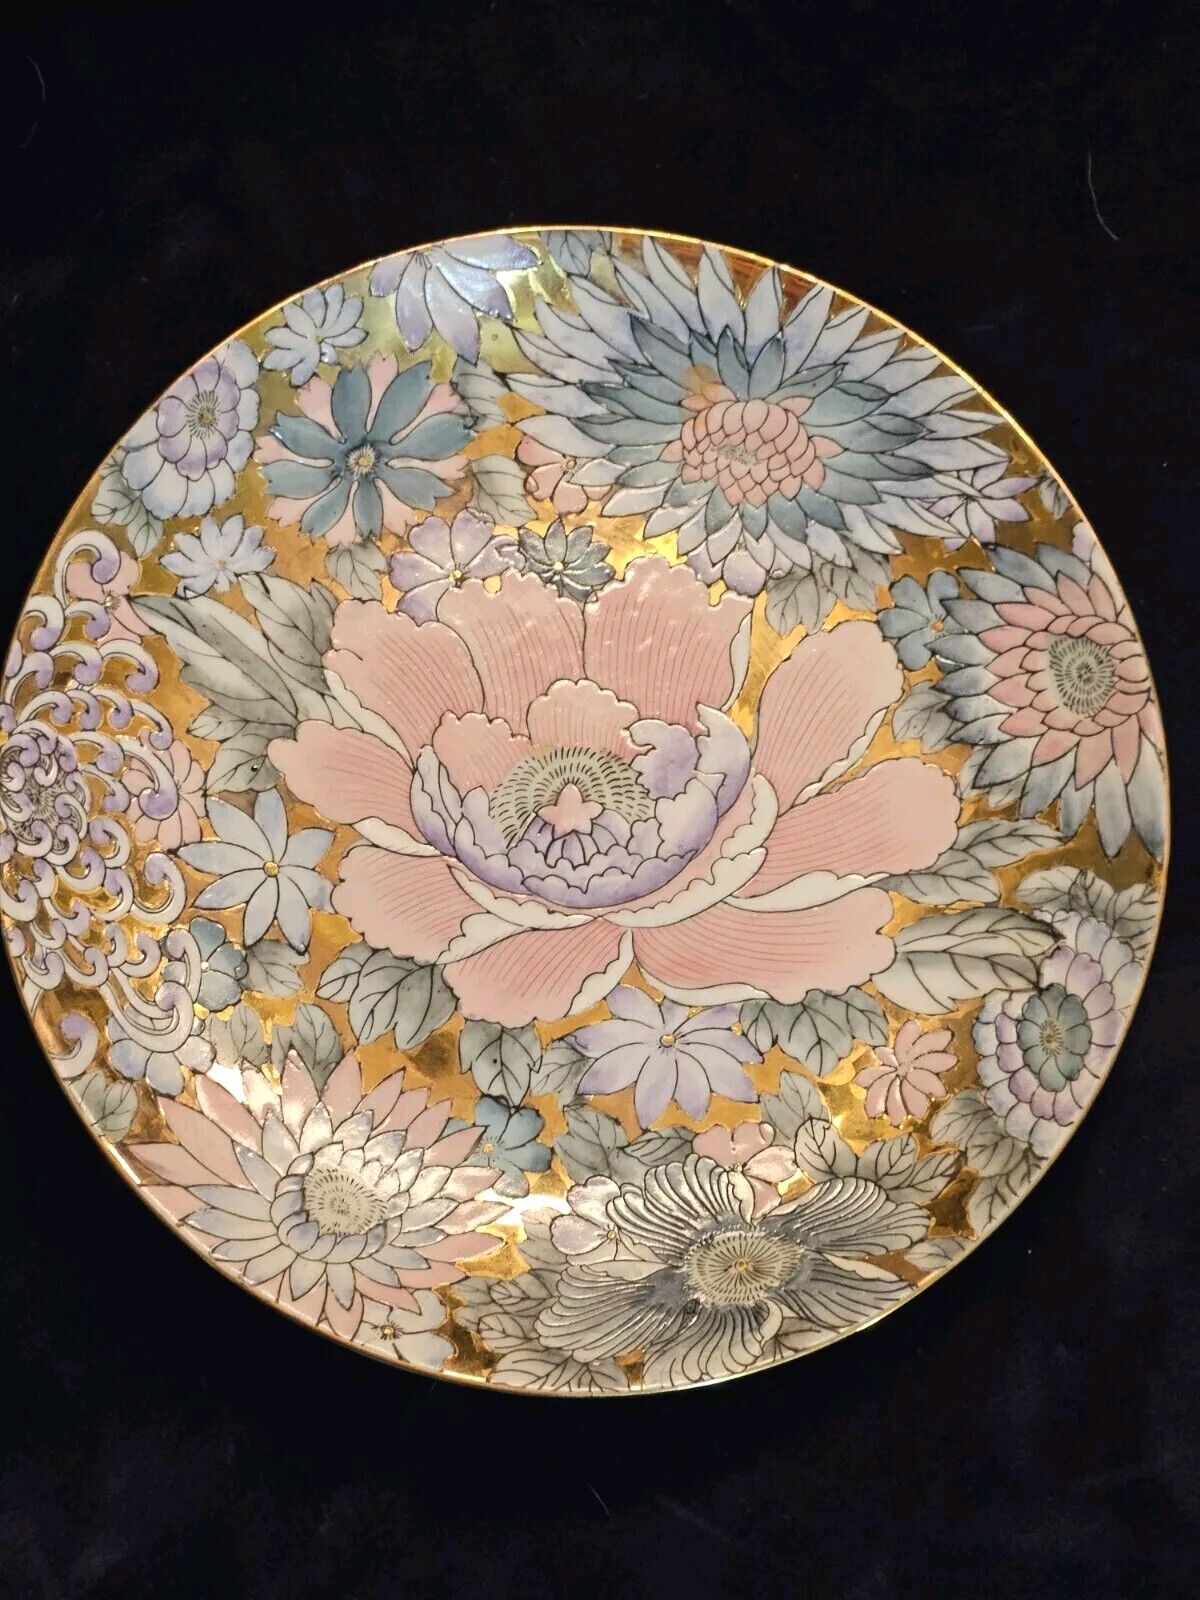 Vintage TOYO Golden Peony 10.5” Decorative Plate Incised Floral Metallic Gold 🌸